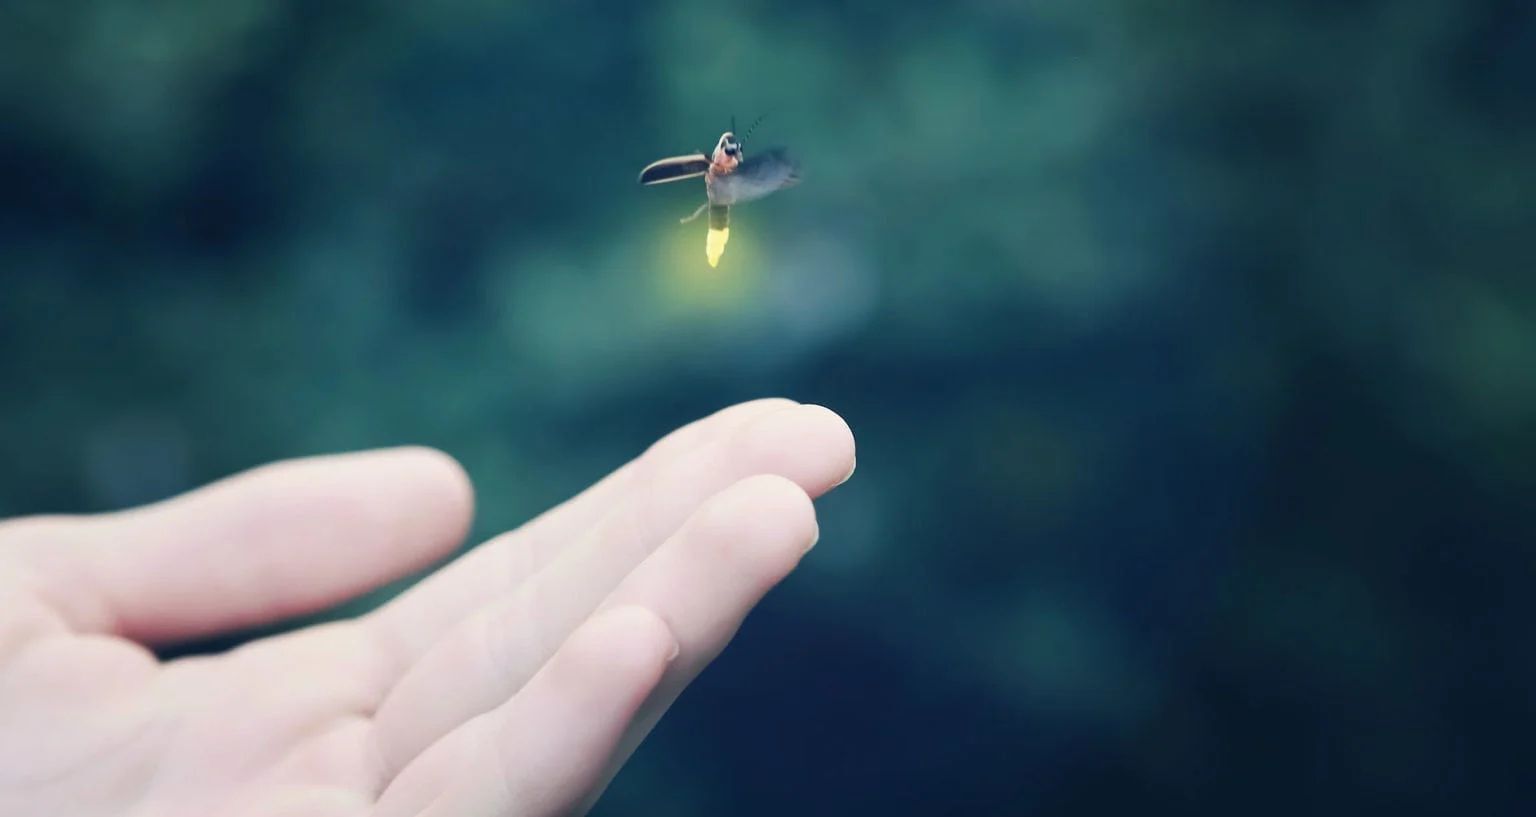 Fireflie hovering above a hand